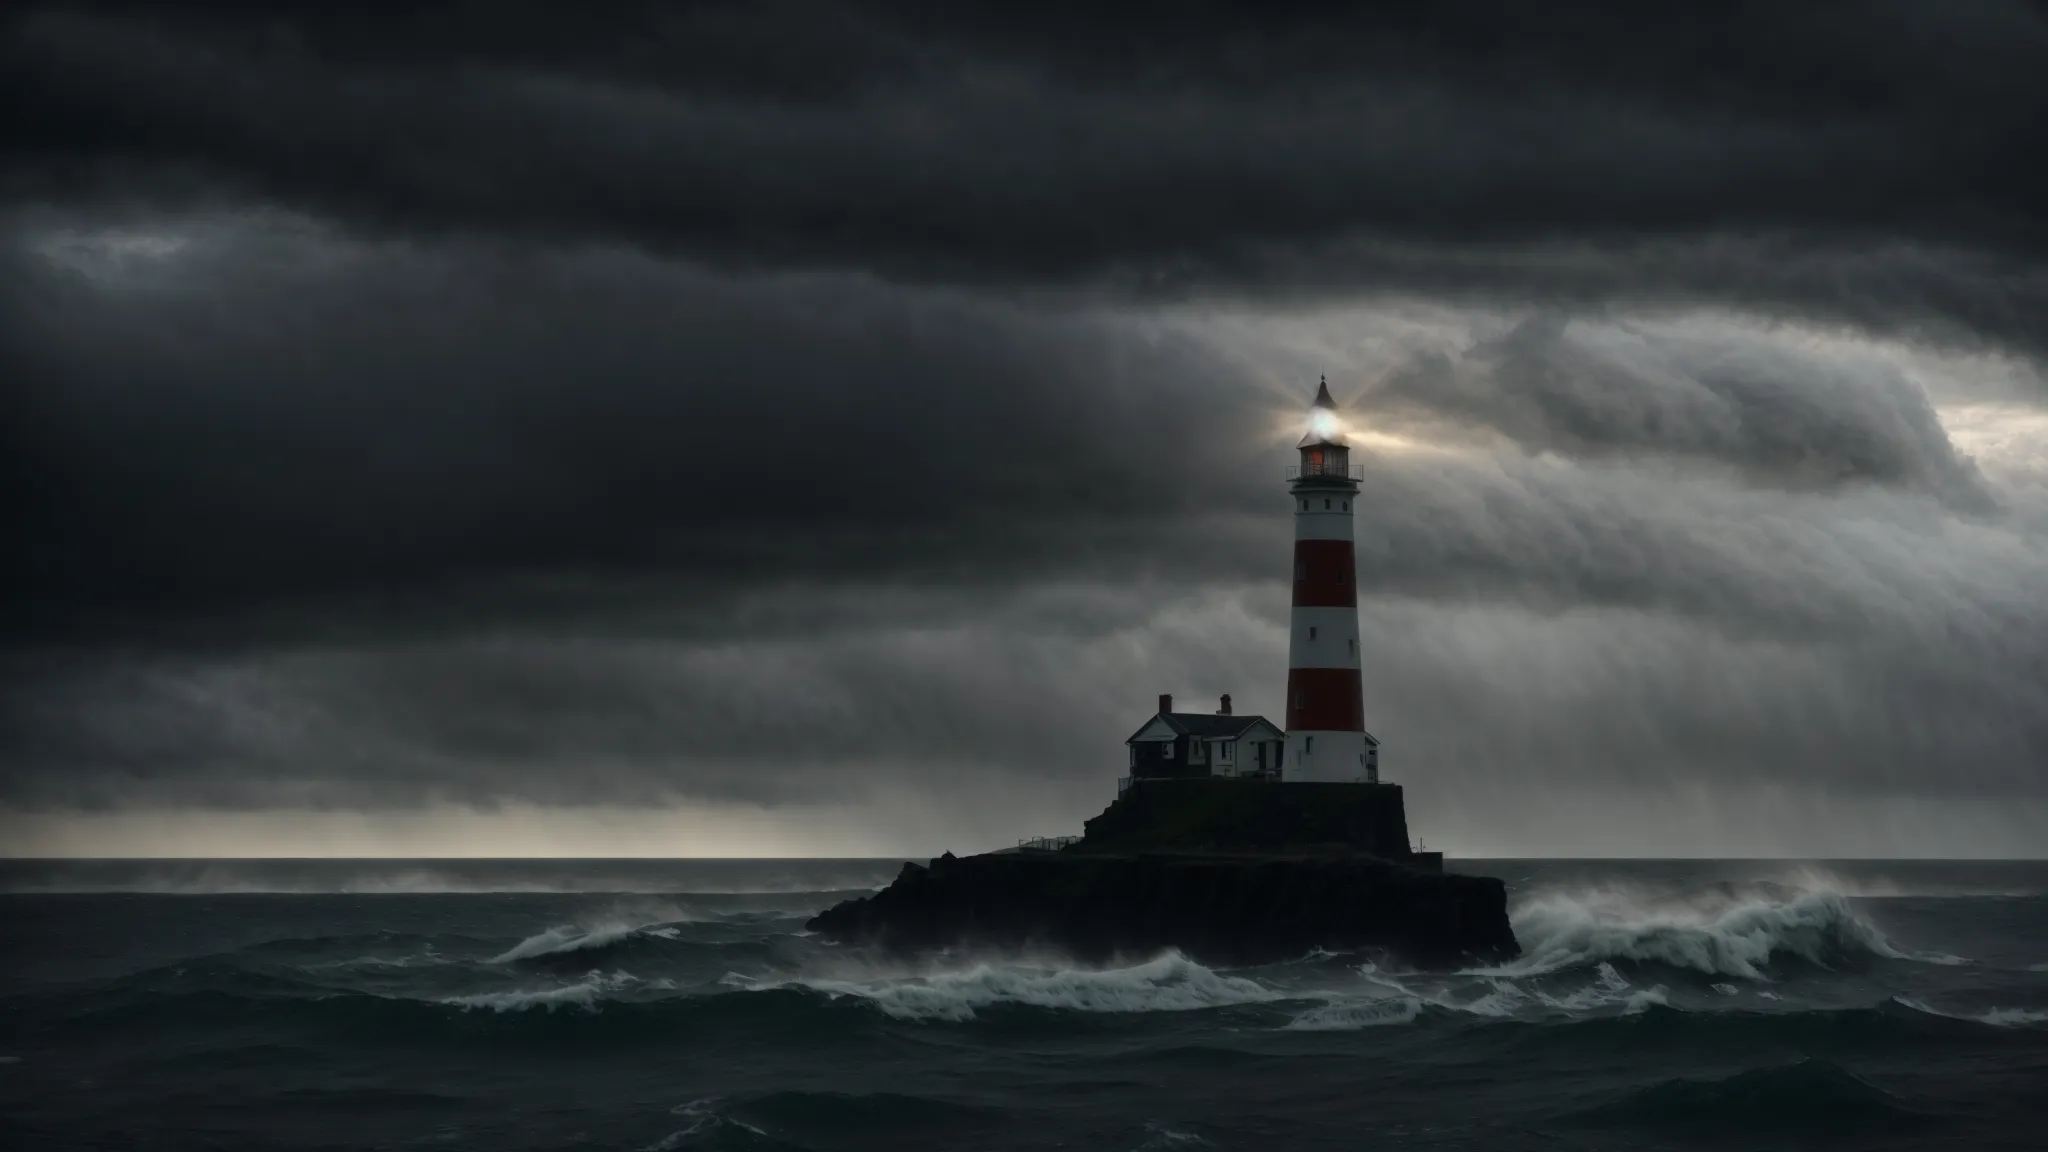 a lighthouse stands tall, casting a bright beam of light over a stormy sea under a dark, cloud-filled sky.